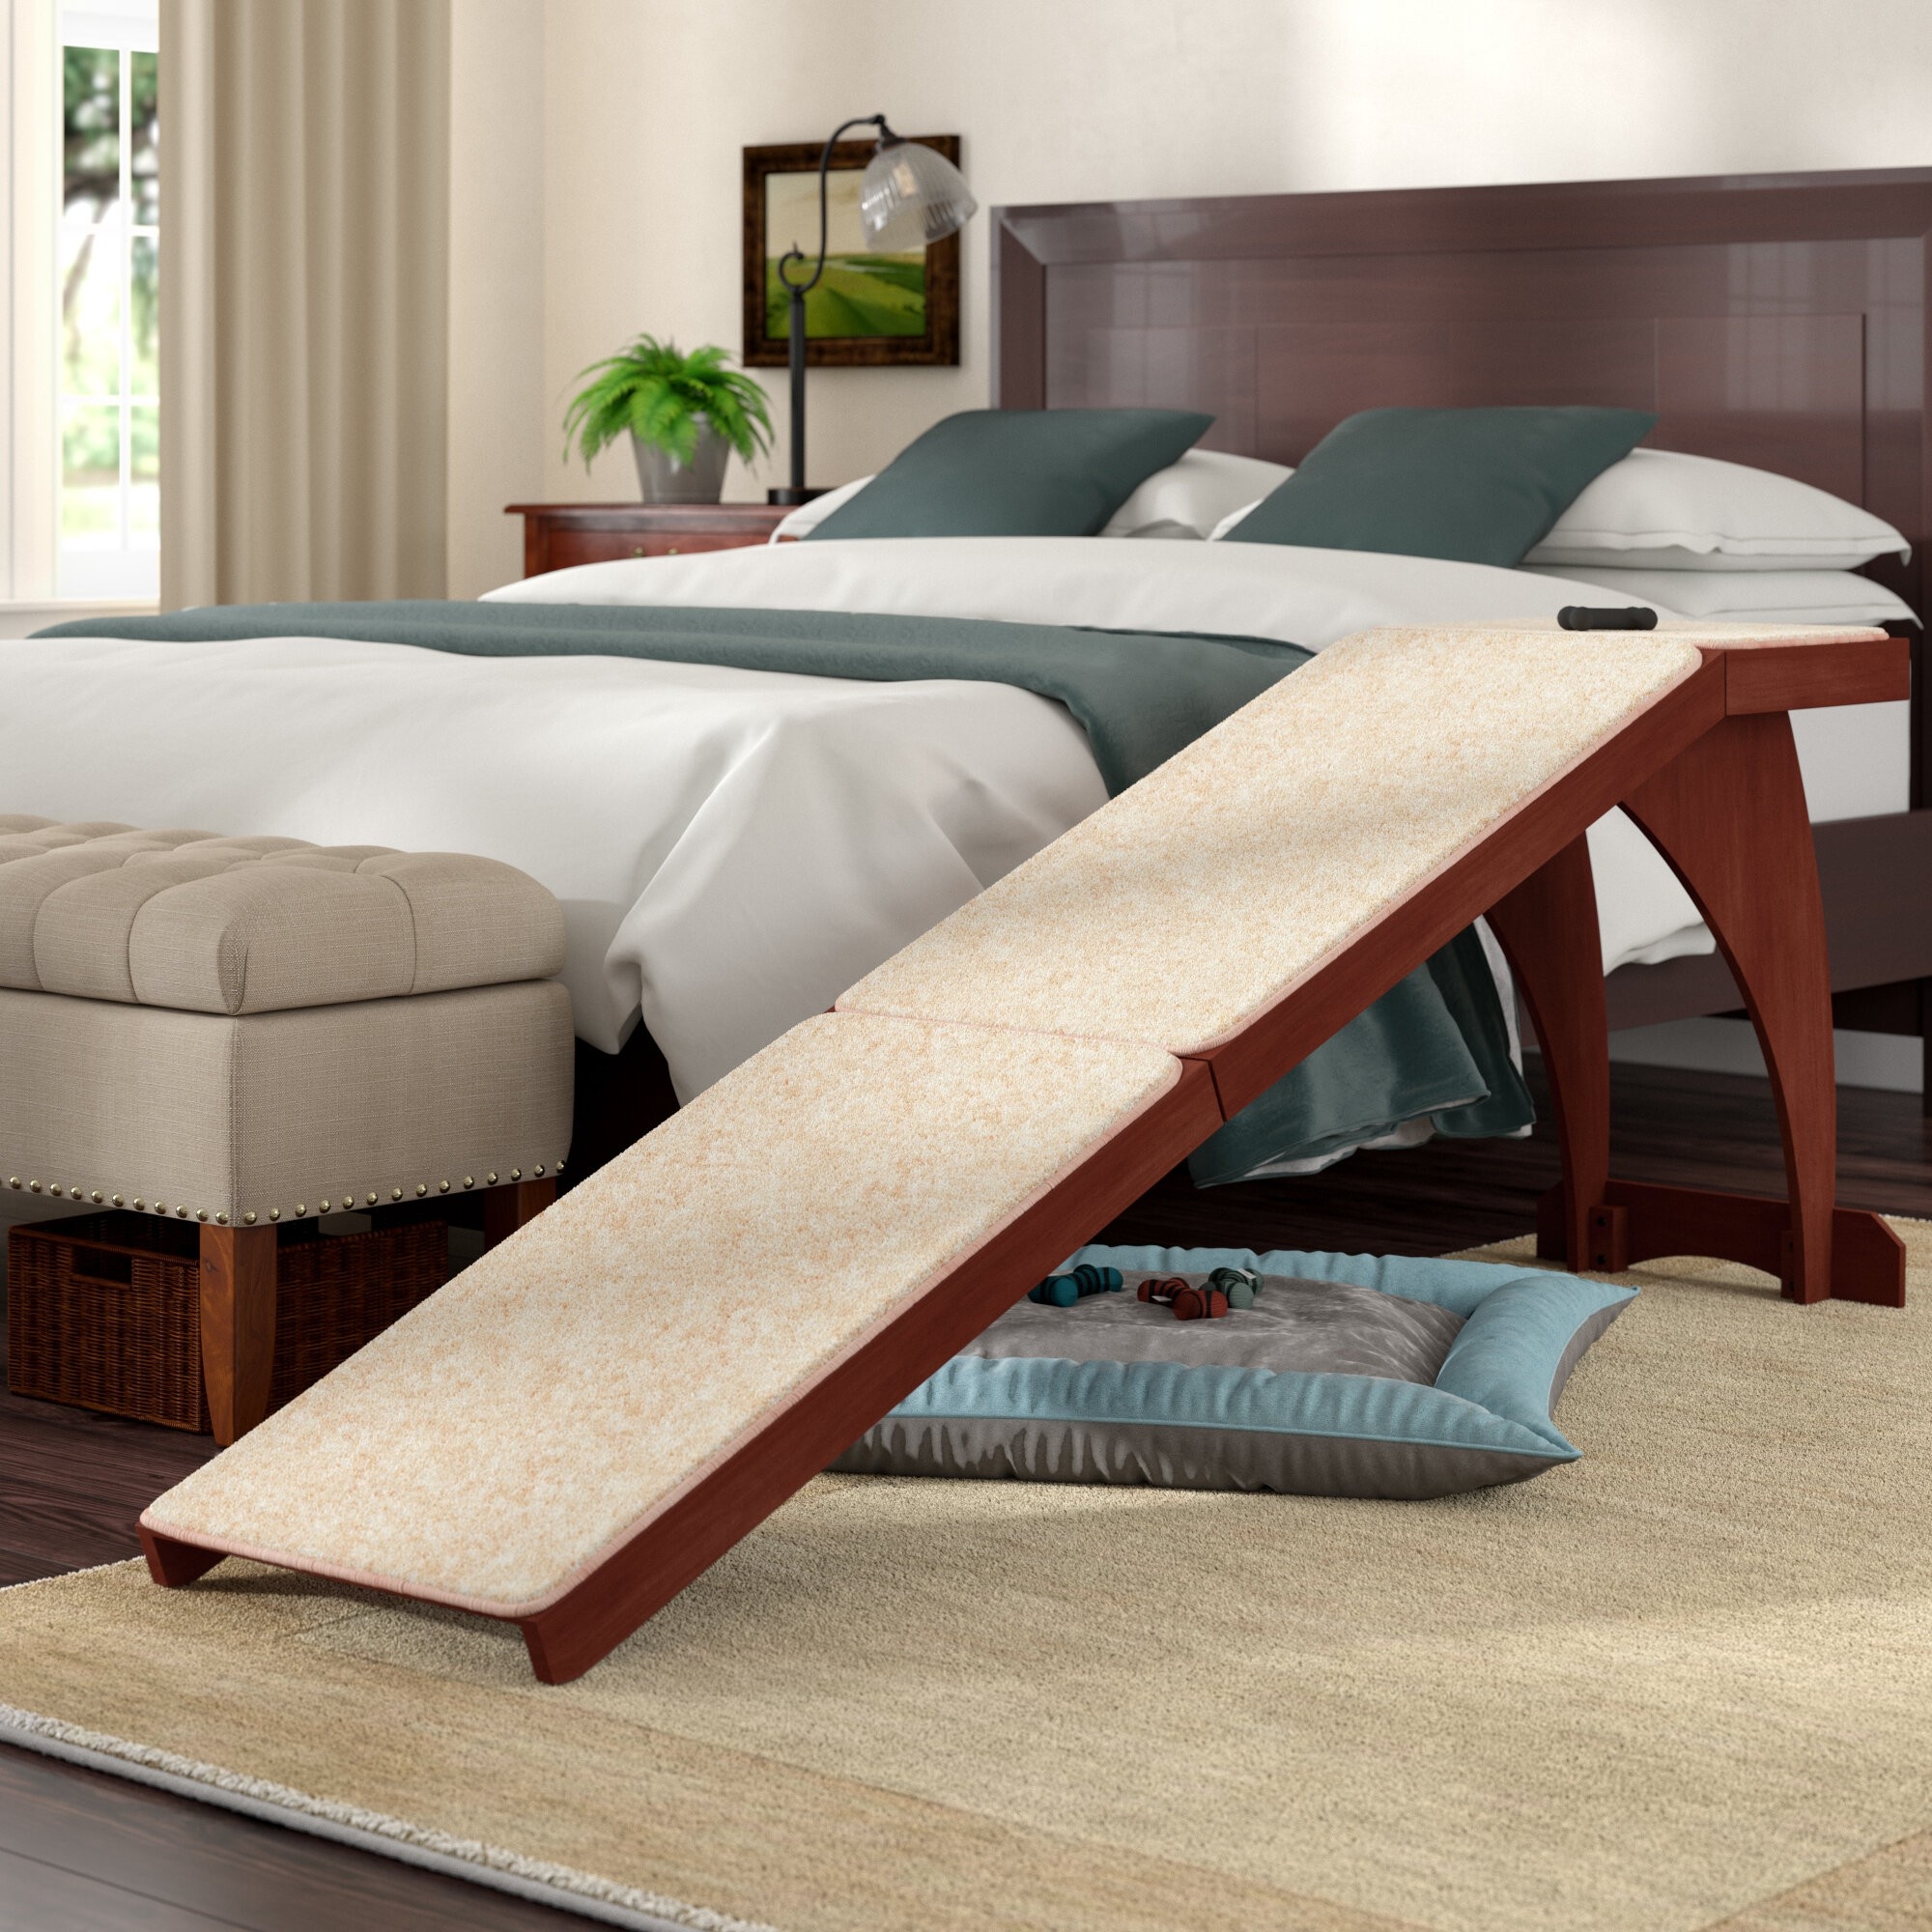 Dog Ramps For Tall Beds - Ideas on Foter